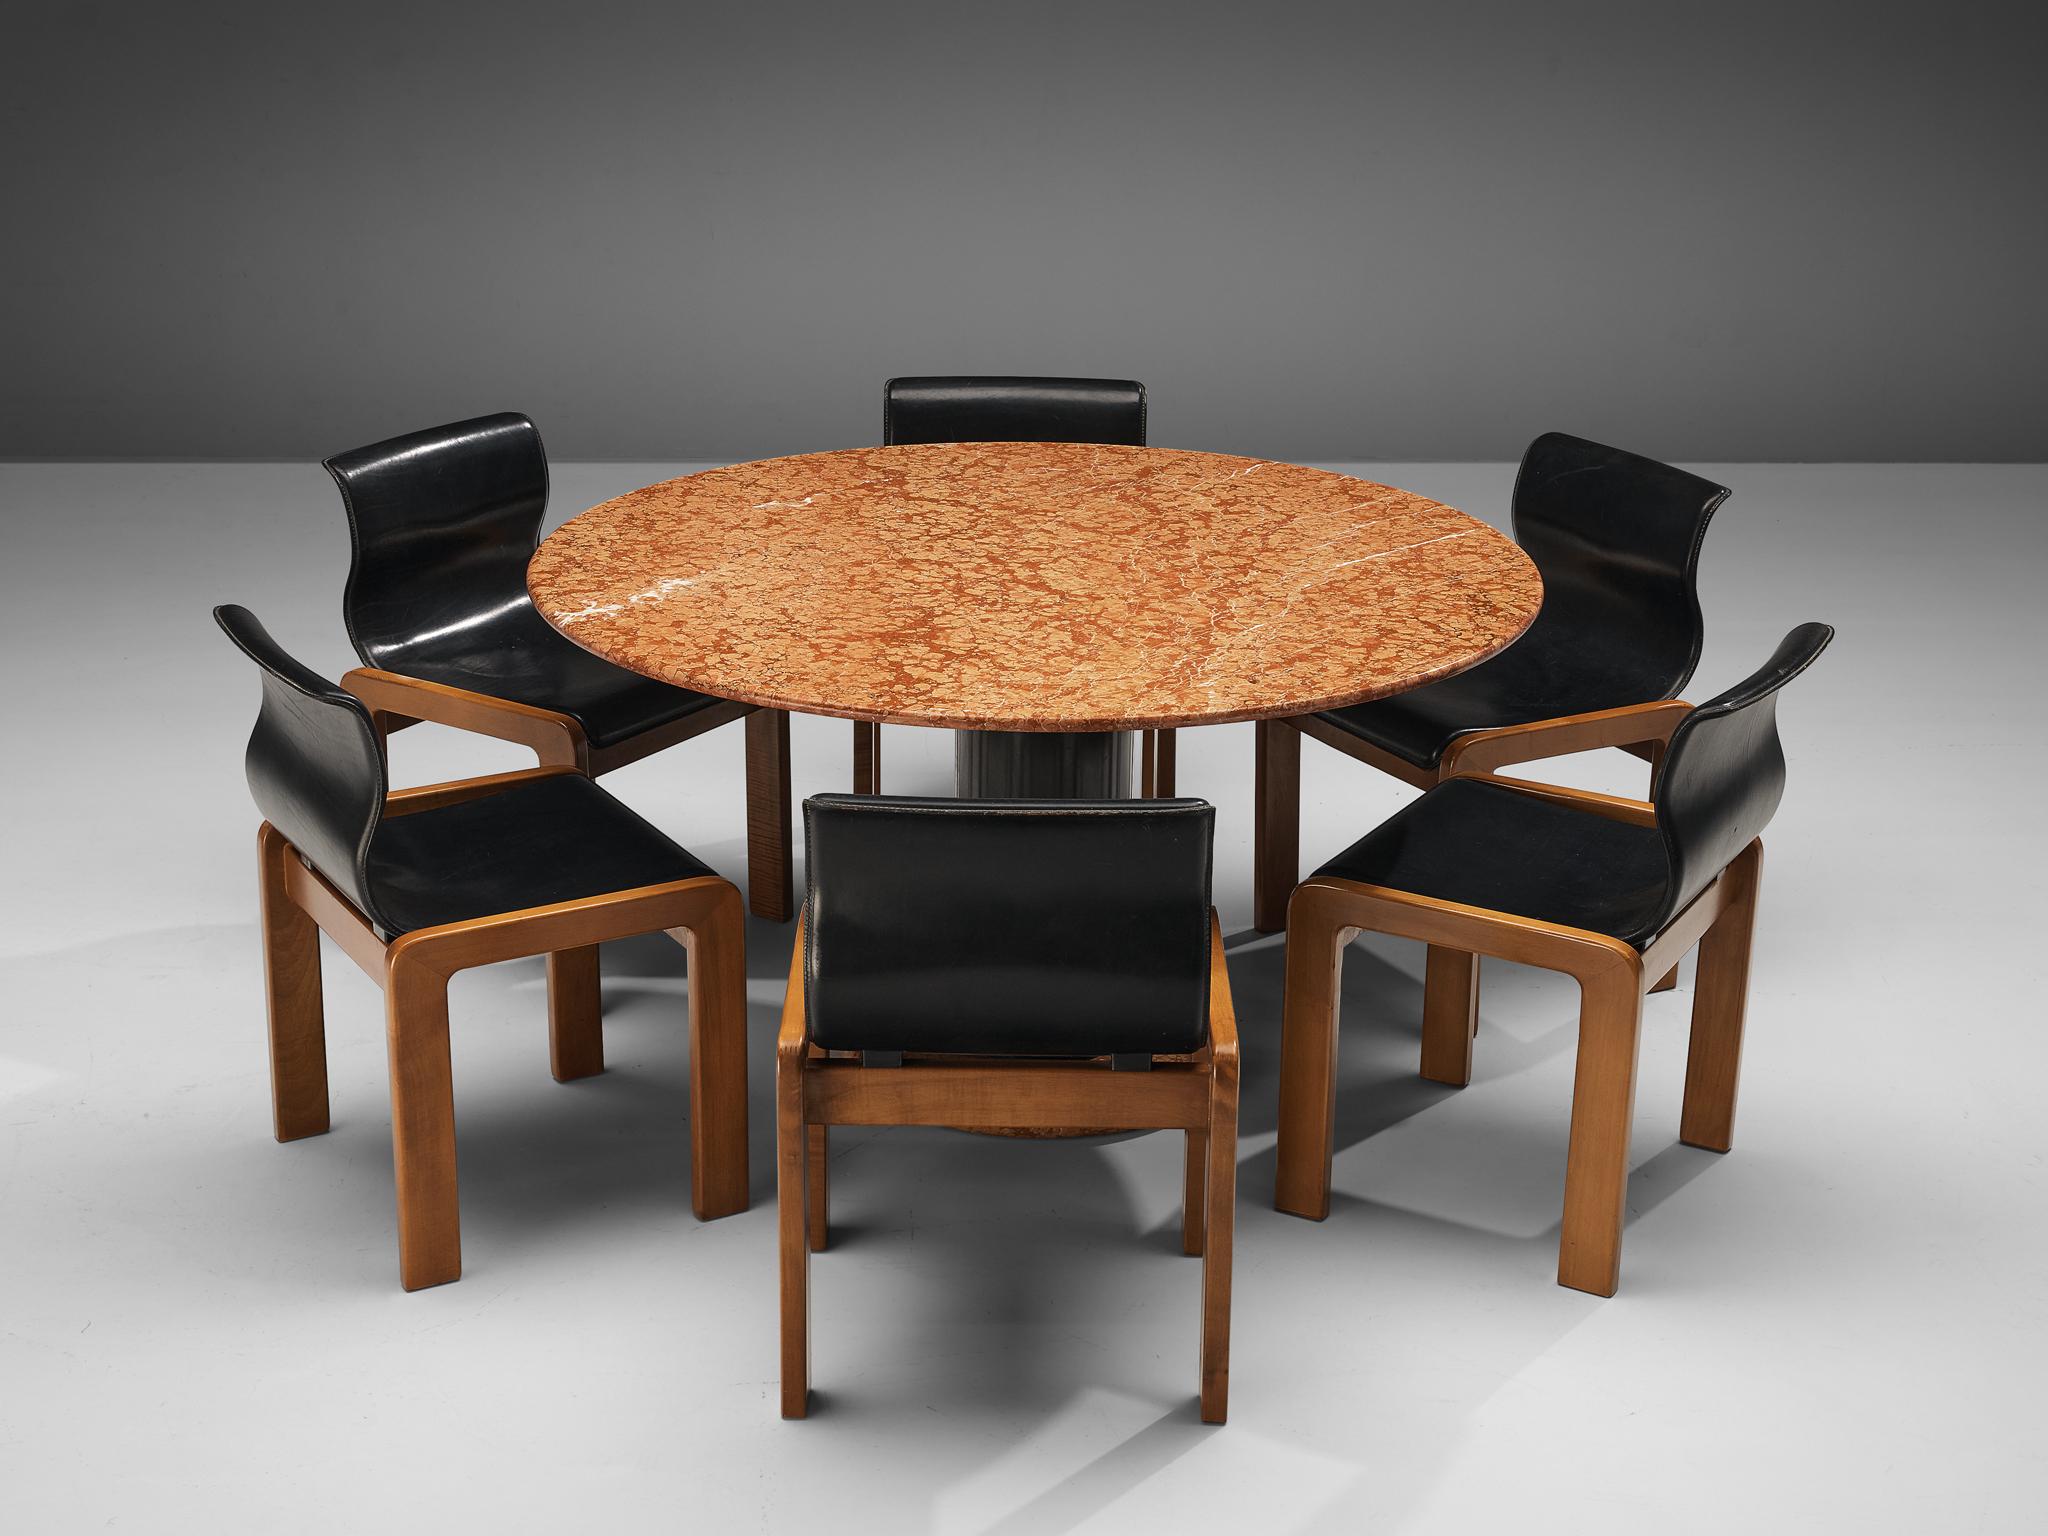 Set of six dining chairs, leather and walnut, Italy, 1970s.

A set of six cubic dining chairs with a distinctive curved backrest. These chairs are made with a frame with lacquered walnut wood. The chairs have a dent seat that curvaciously flows